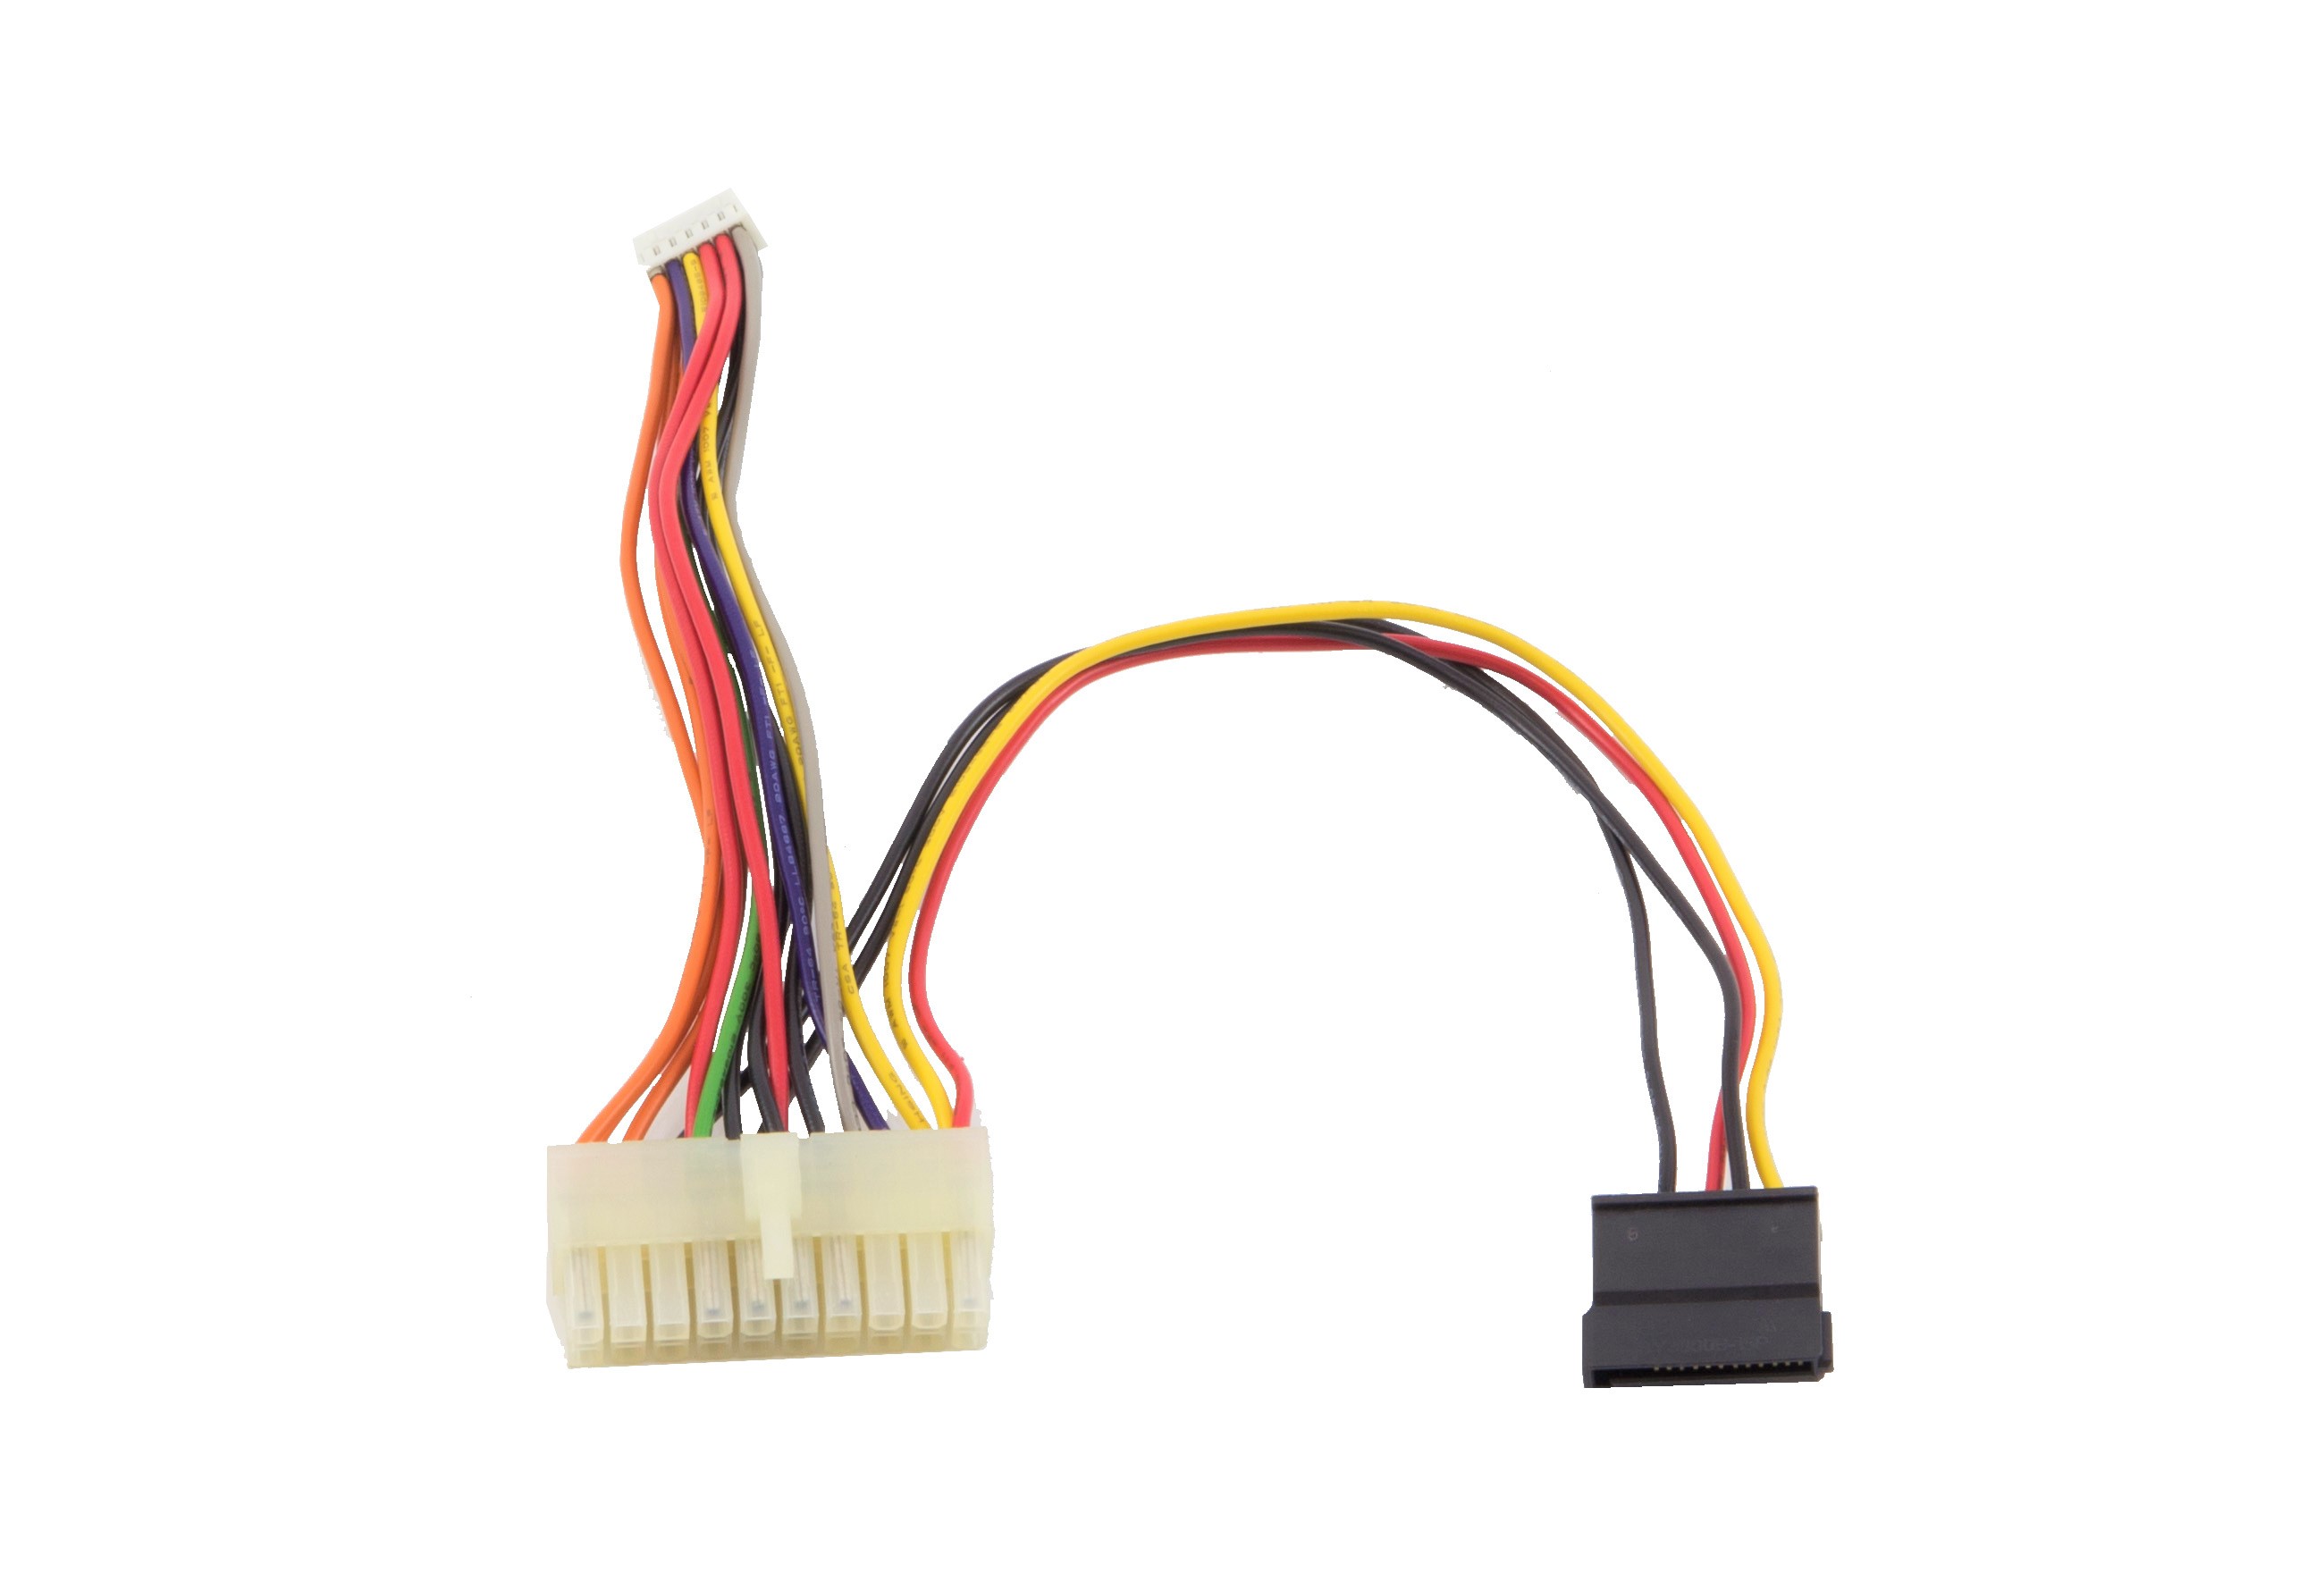 20PIN ATX+SATA CABLE  |Products|Accessories|Cable & Cord